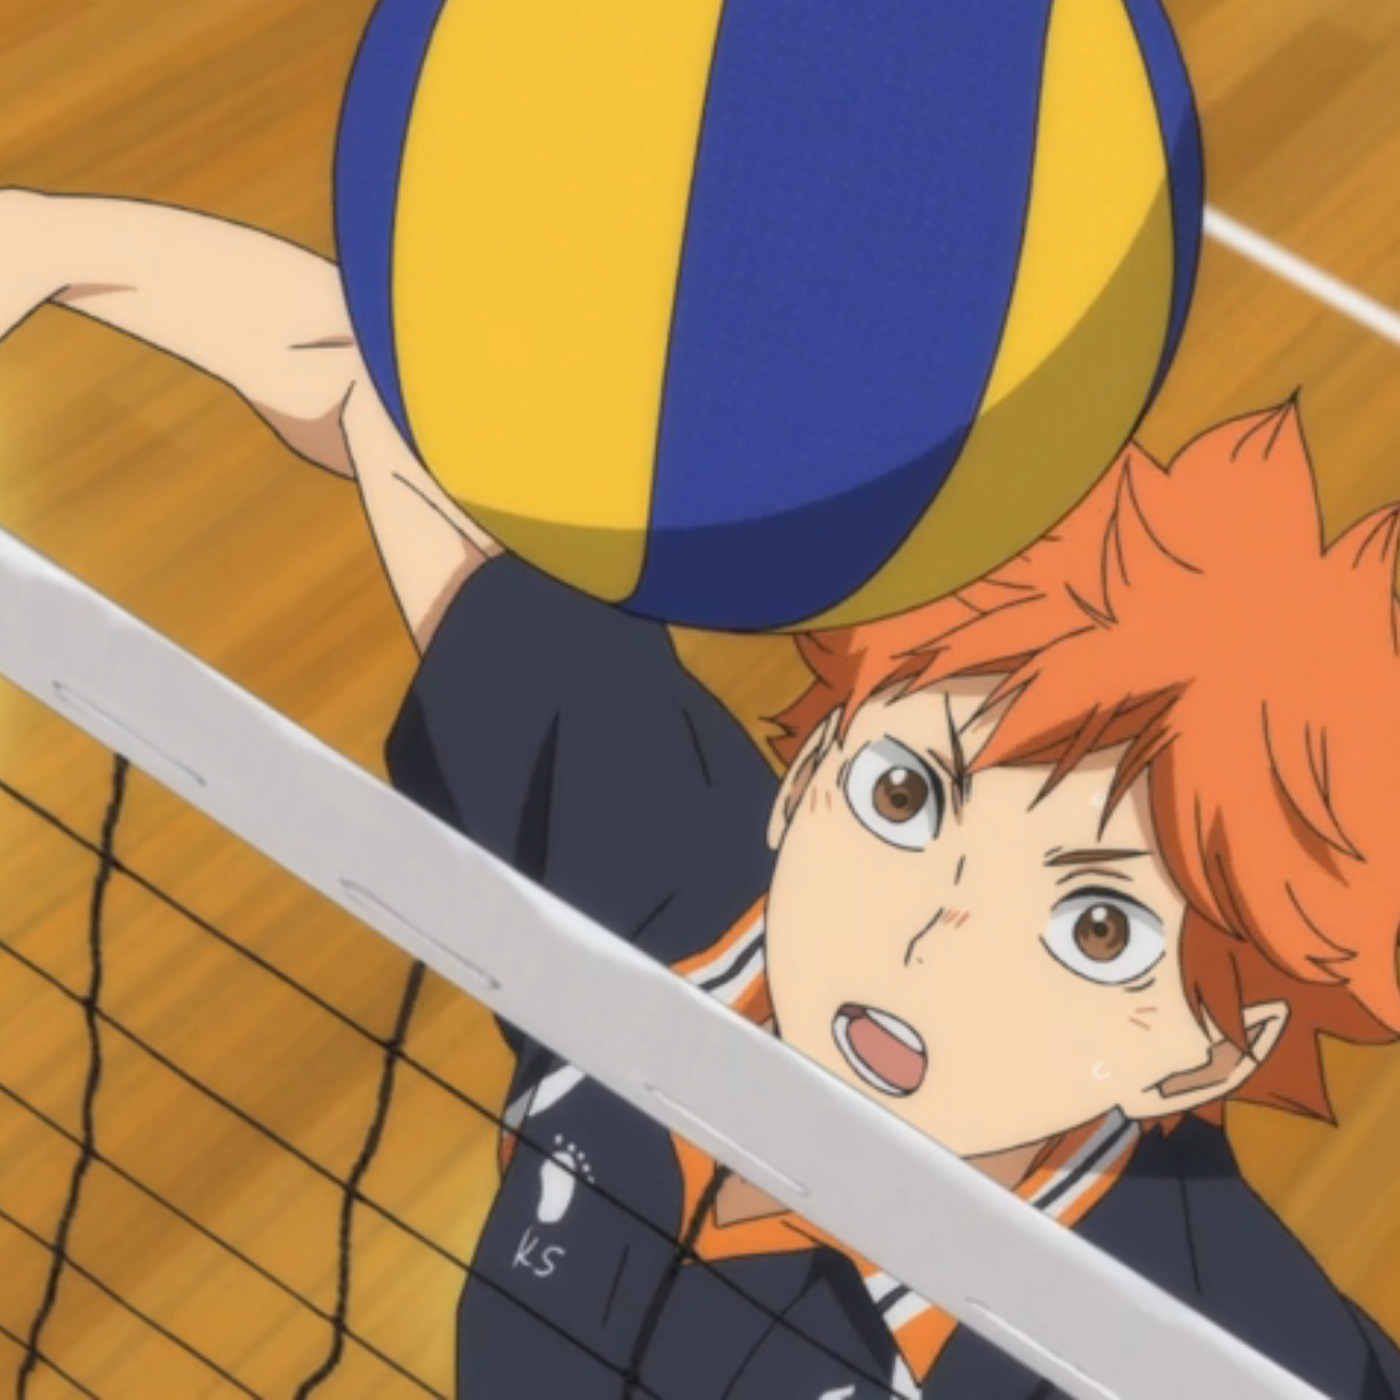 Haikyu!! helped me understand why people care about sports - Polygon